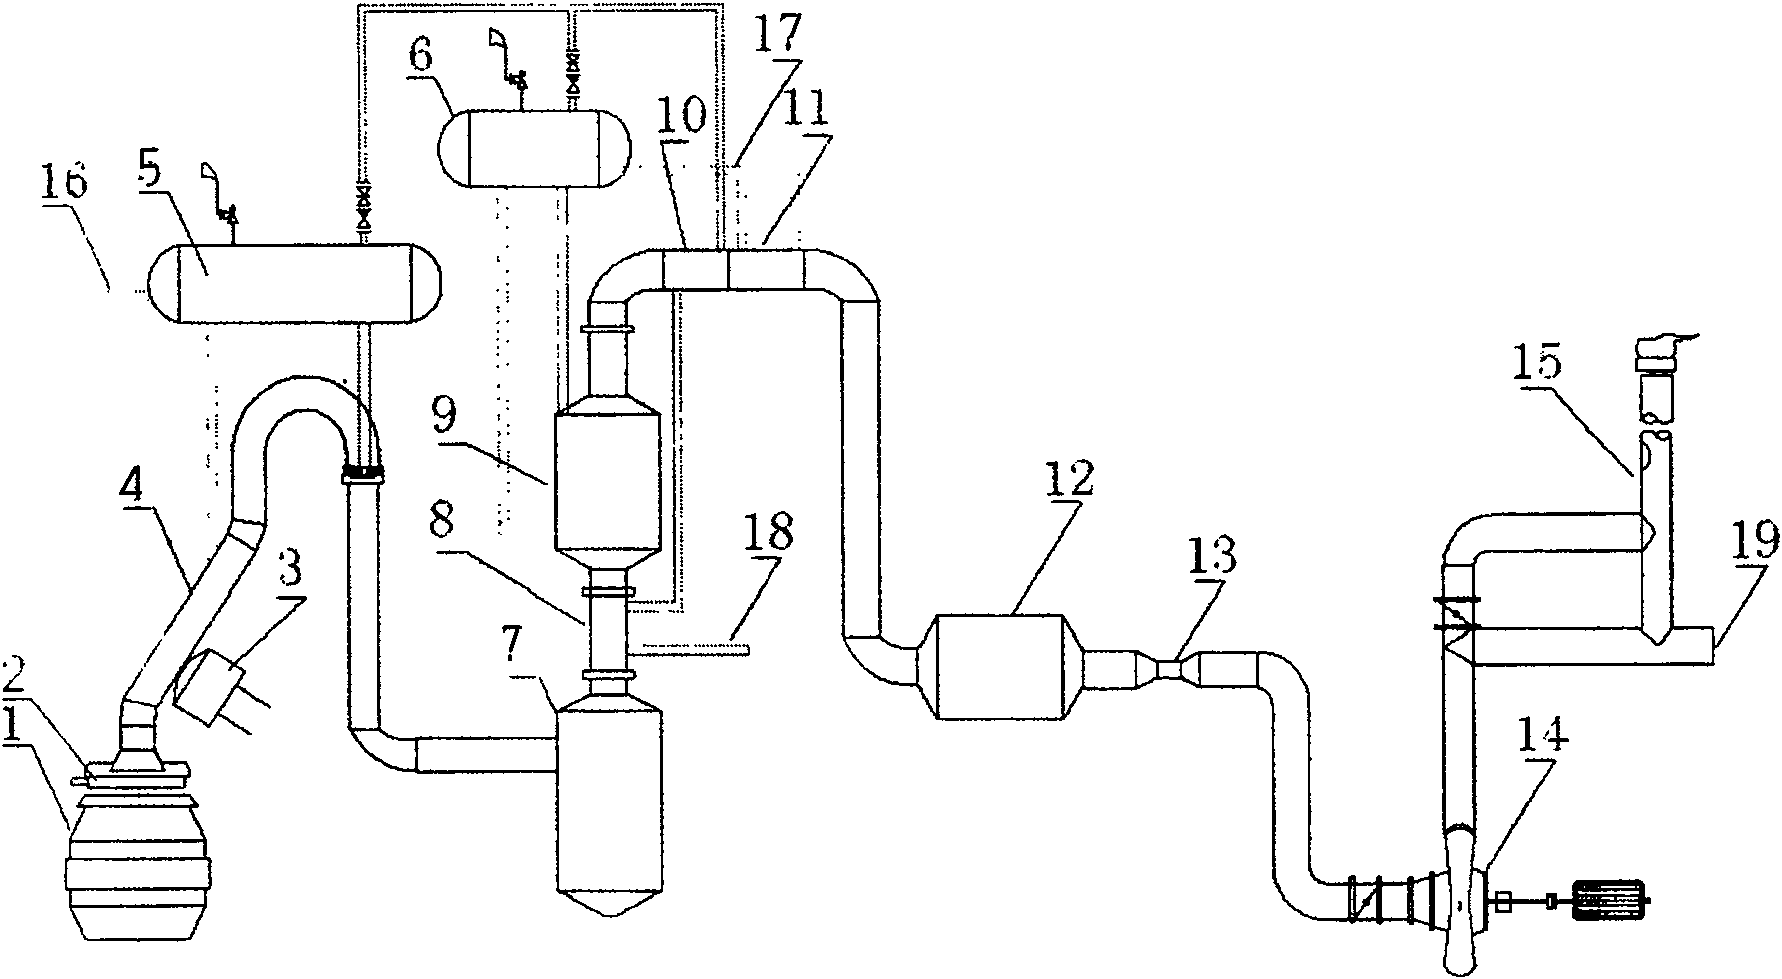 Process for recovery of excess energy of flue gas from converter